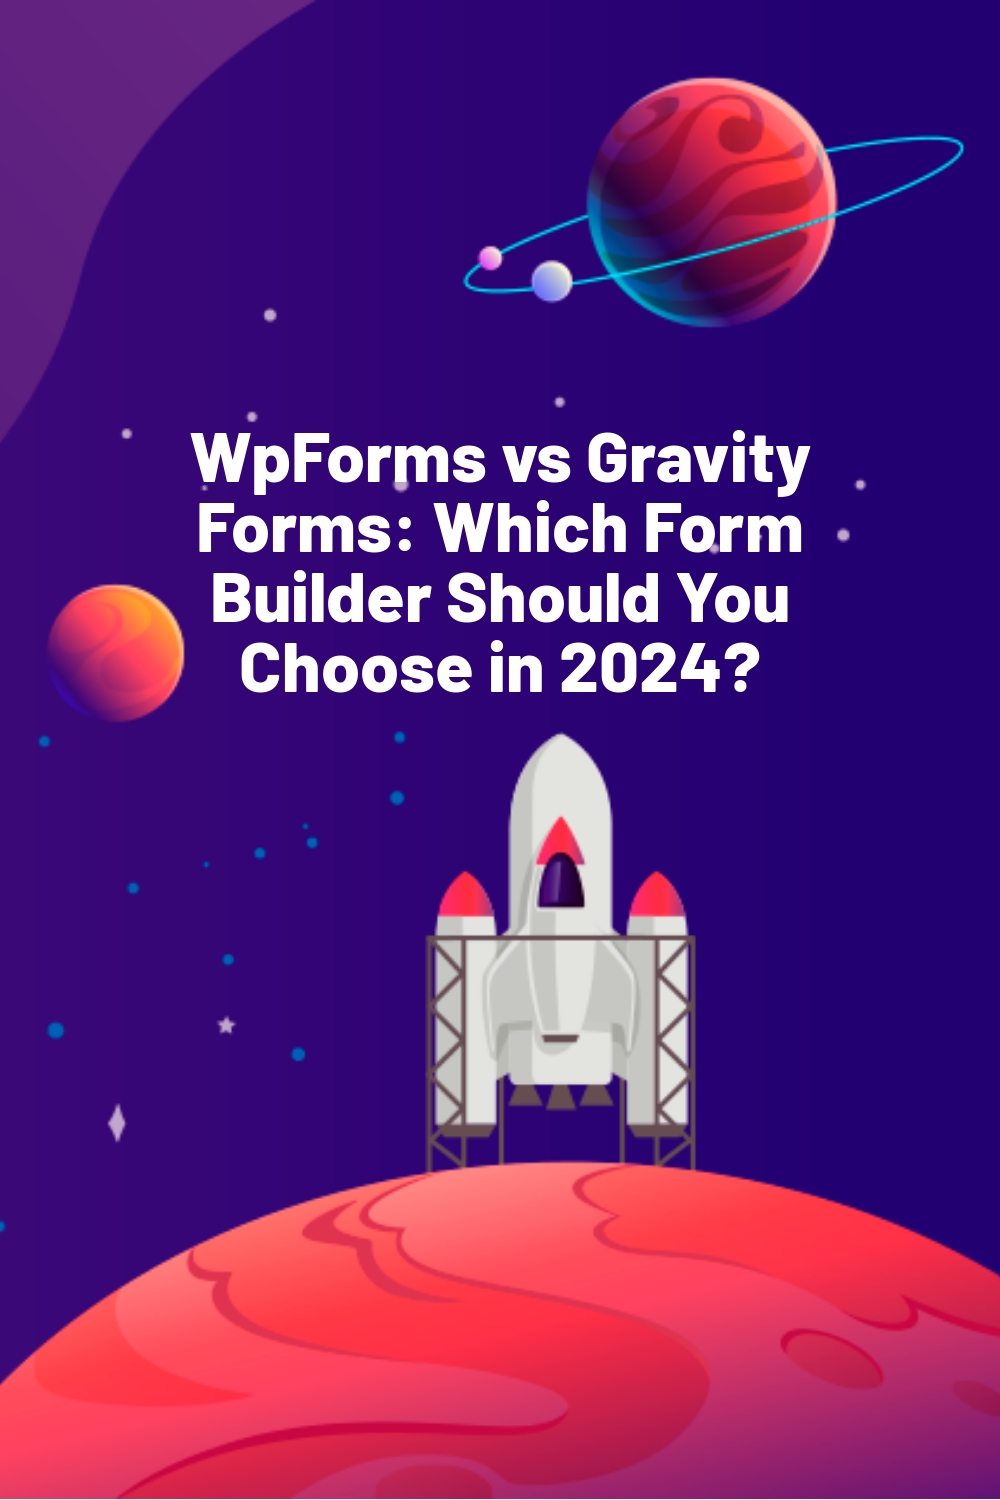 WpForms vs Gravity Forms: Which Form Builder Should You Choose in 2024?